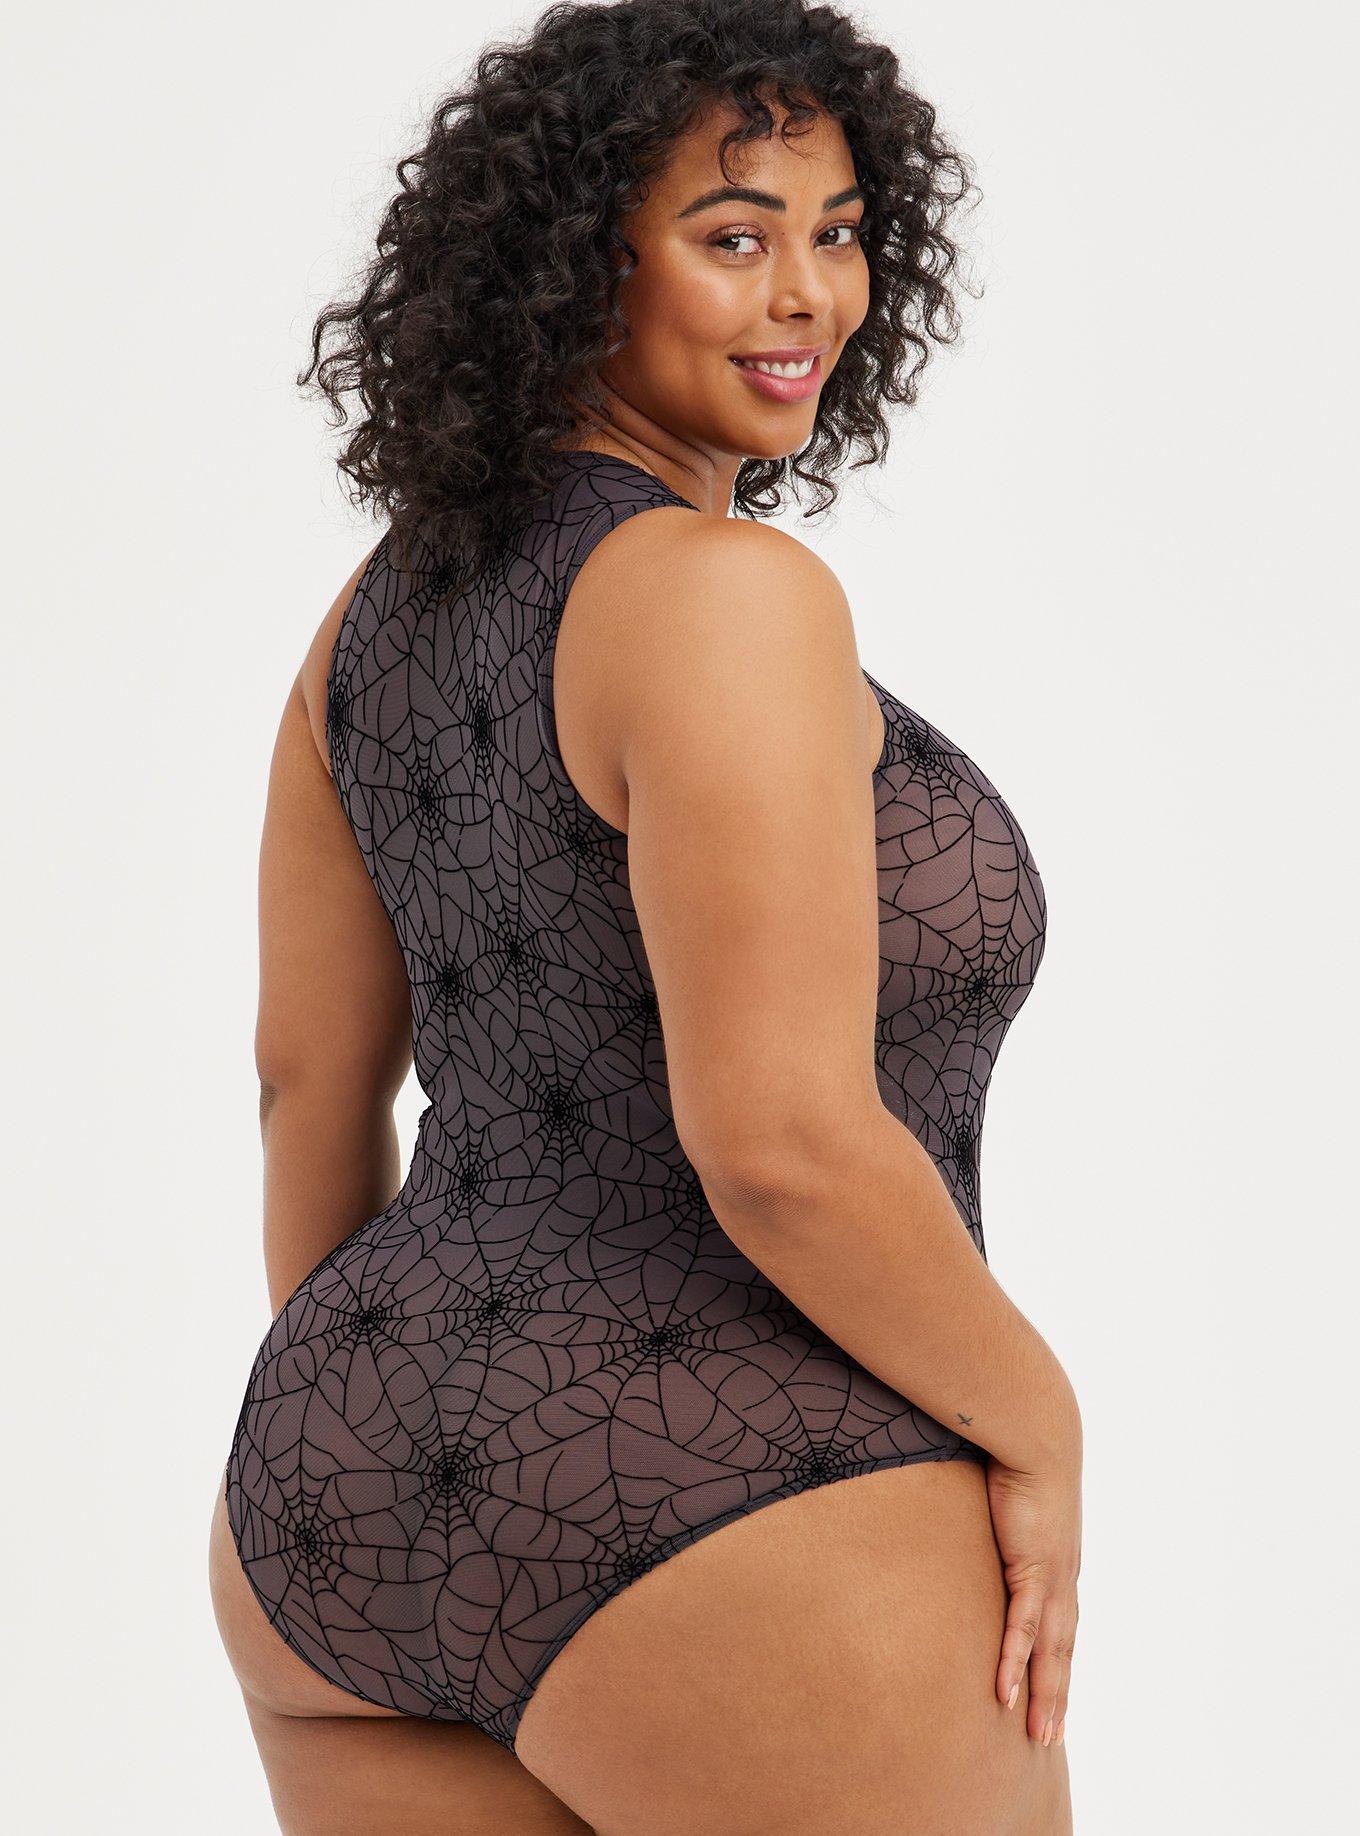 Wow Pictures! Increase My Curves - Curvy Botswana Lady Gets Even Bigger  Curves - Romance - Nigeria